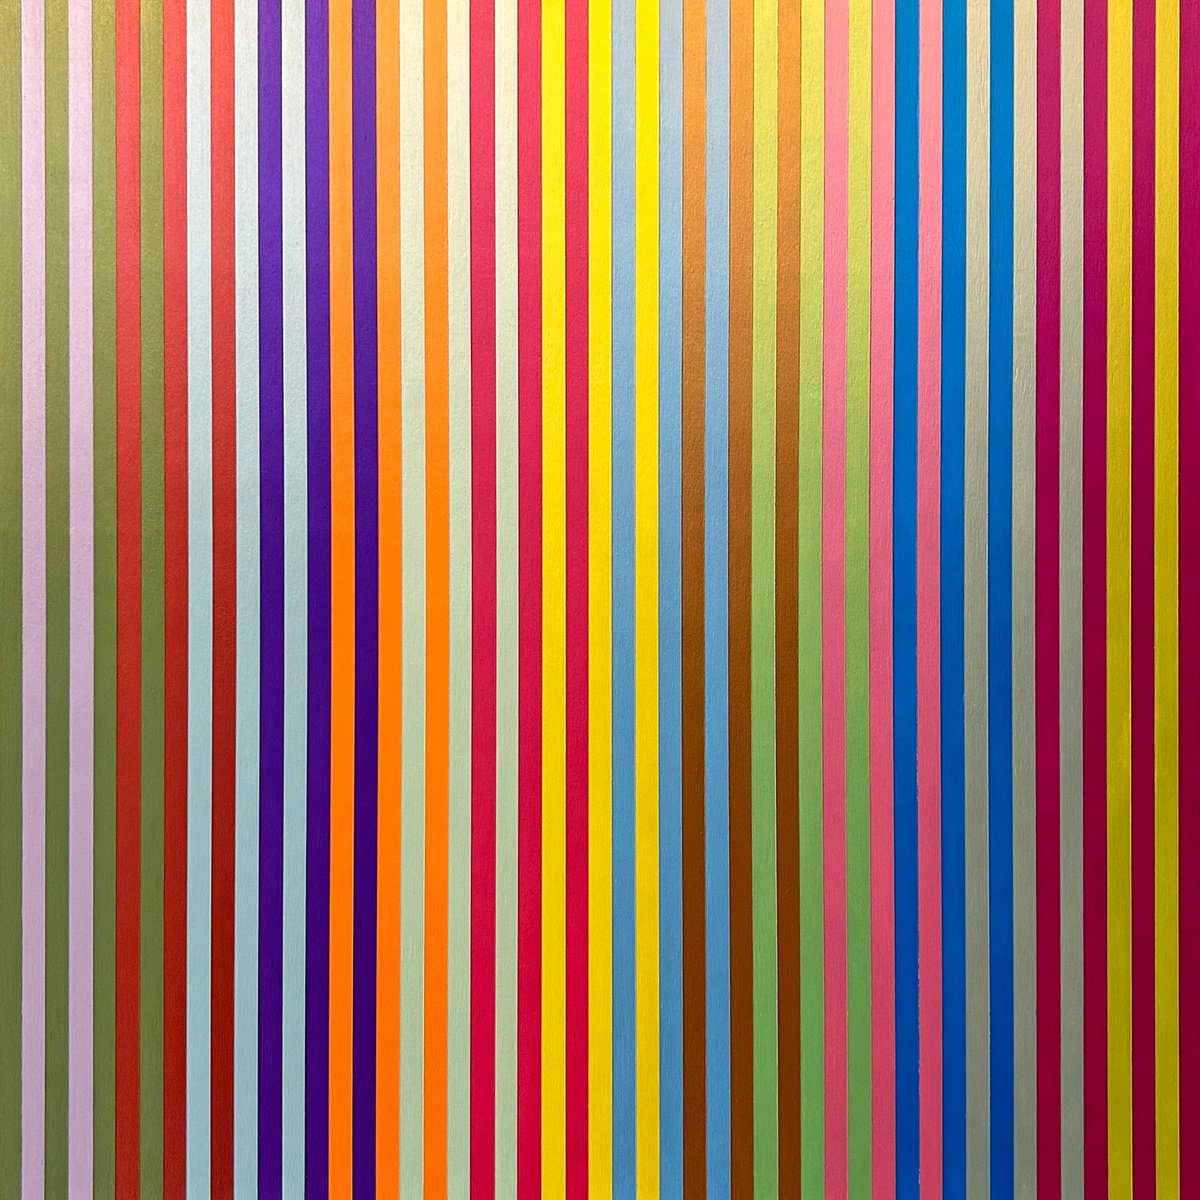 Stripes No.34 by Crispin Holder